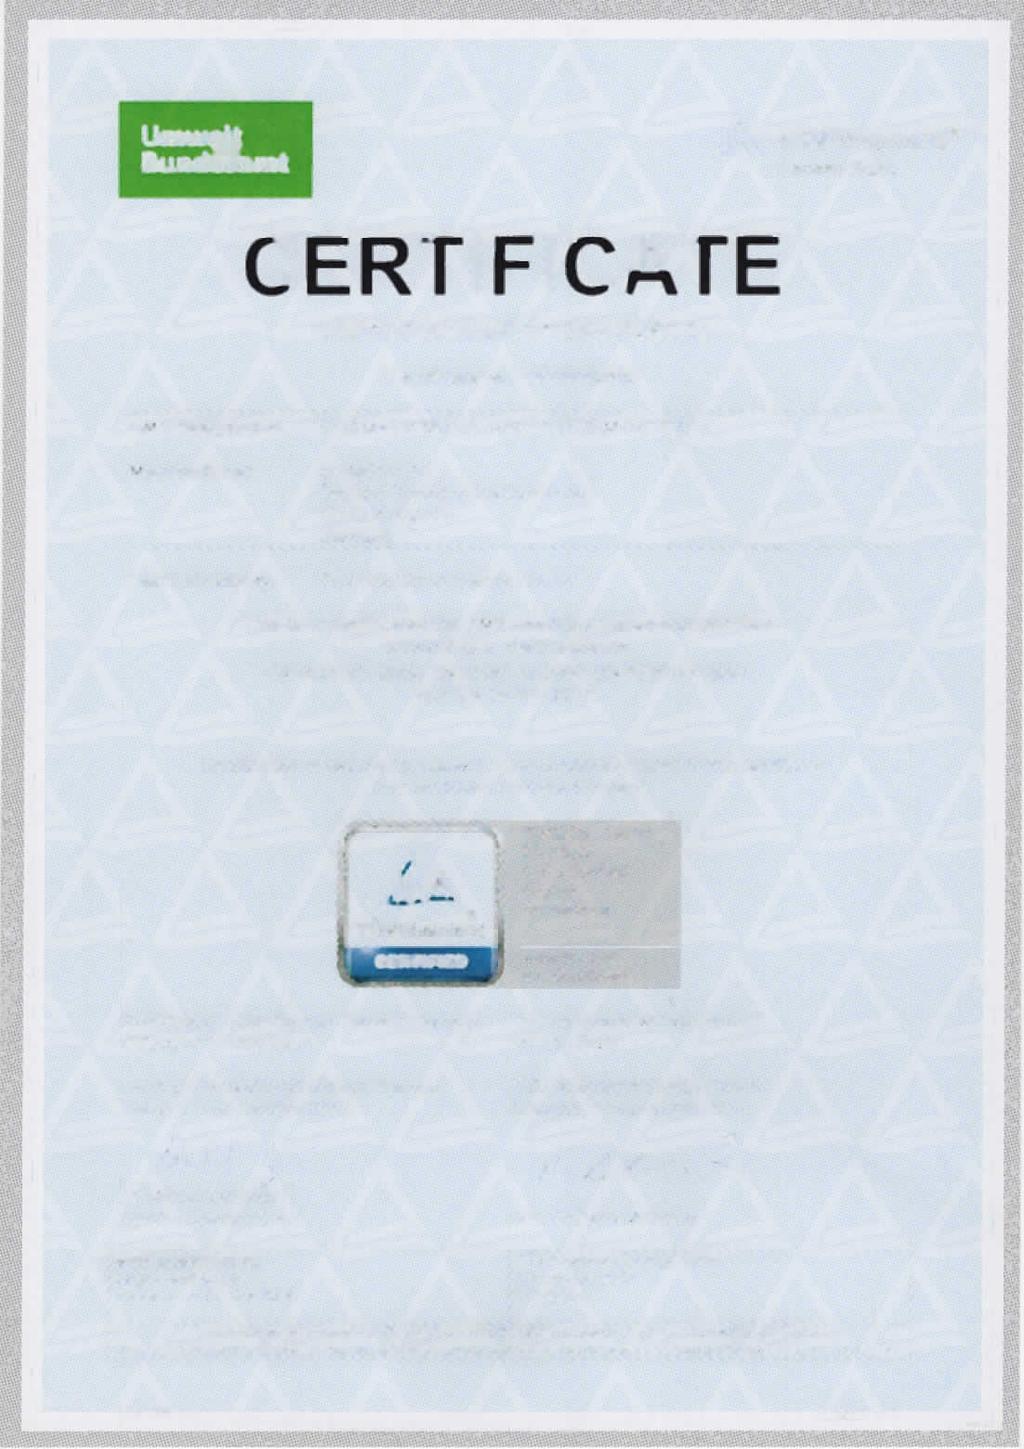 ATÜVF}heinland Precisely Right. CERTIFICATE of Product Conformity (QAL1 ) Certificate No.